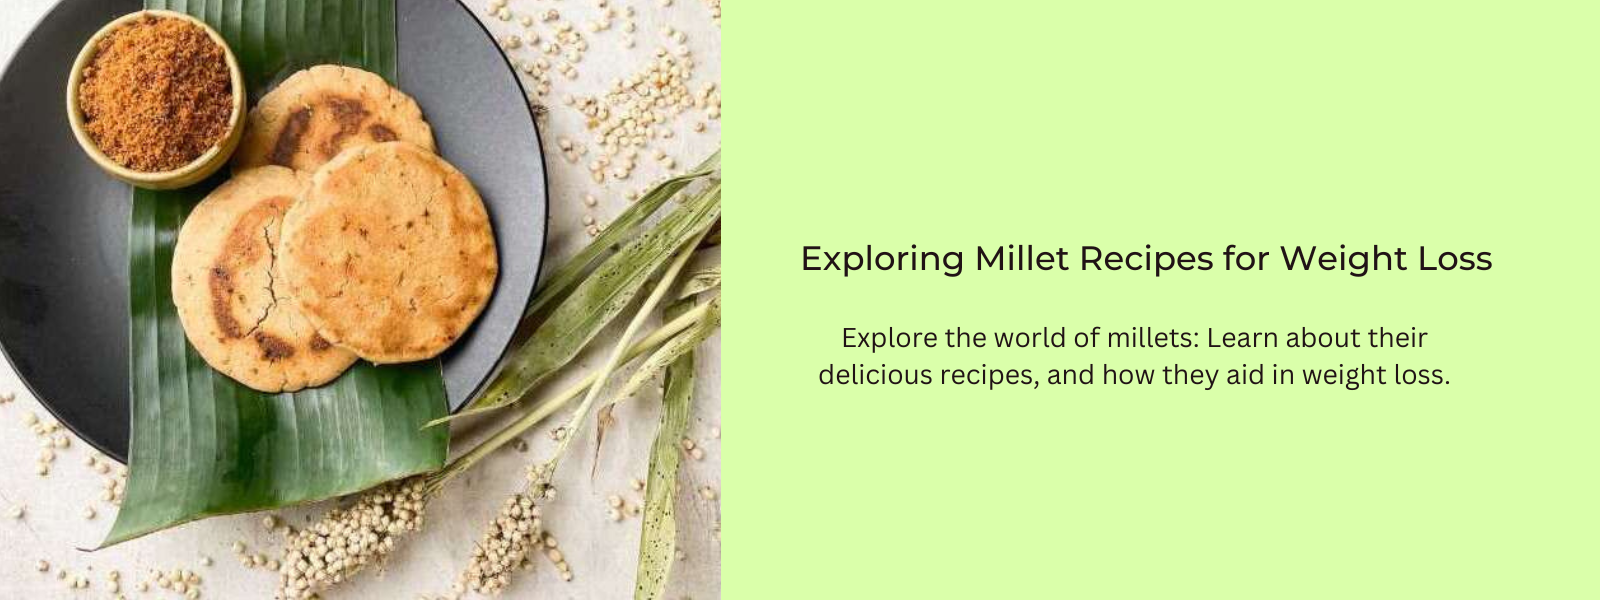 Exploring Millet Recipes for Weight Loss